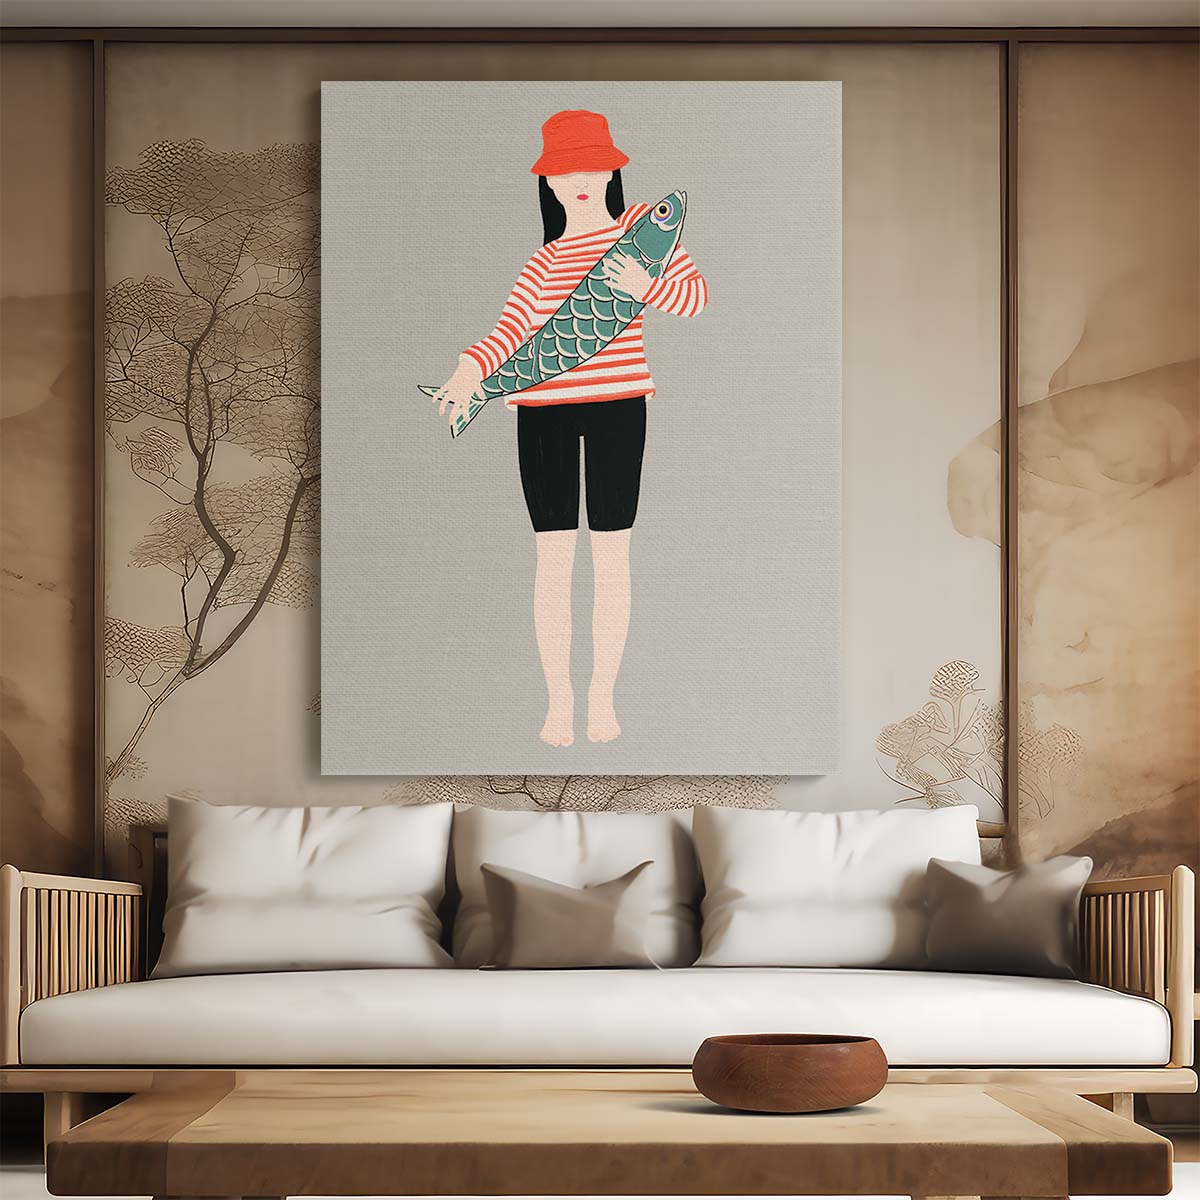 Japandi Red Illustration of Asian Girl Catching Fish, by Jota de jai by Luxuriance Designs, made in USA